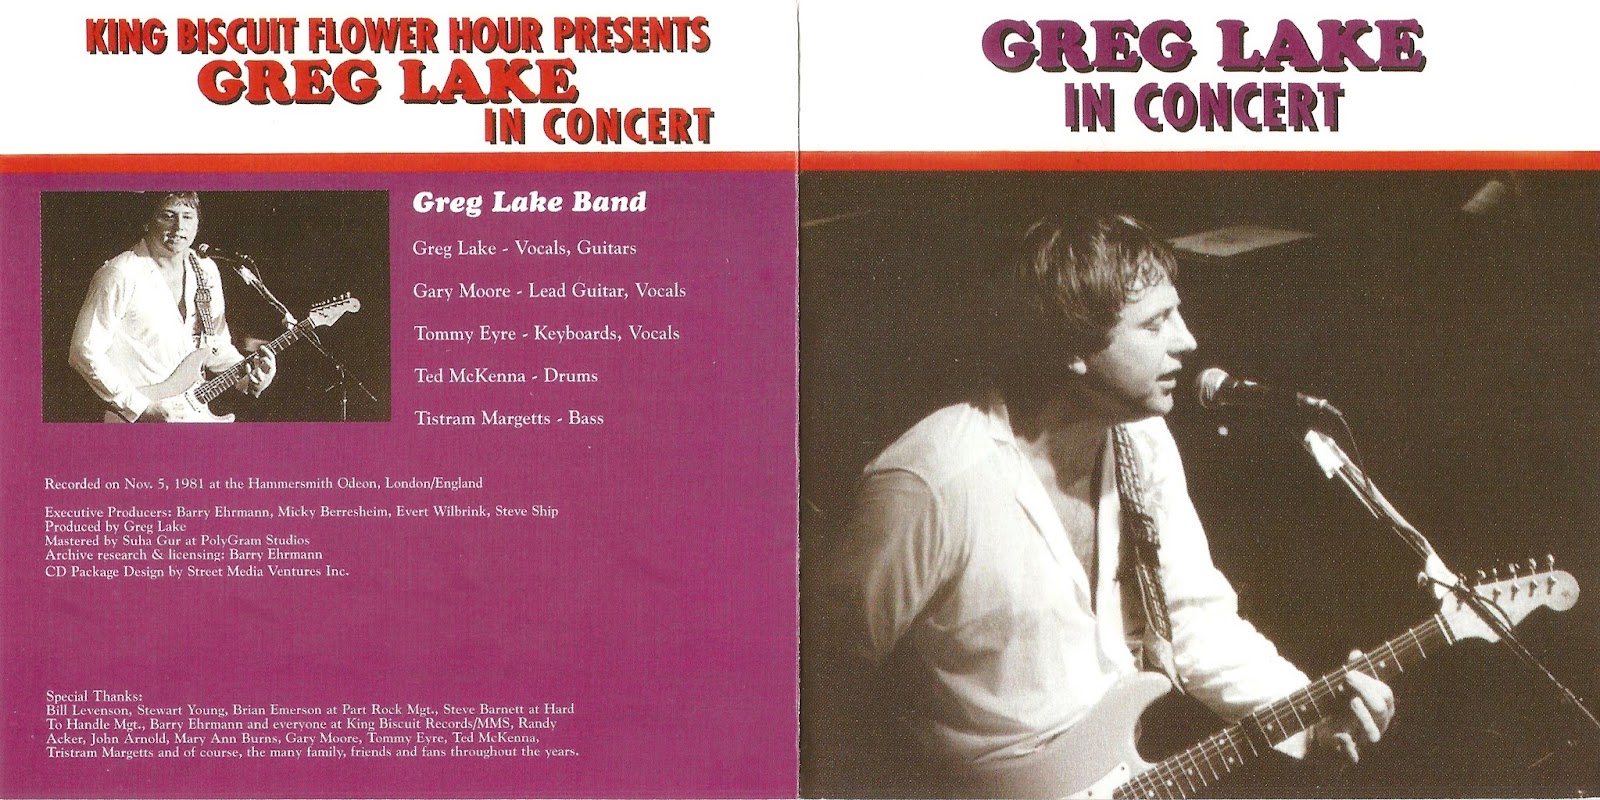 1995 In Concert. The King Biscuit Flower Hour - Greg Lake 